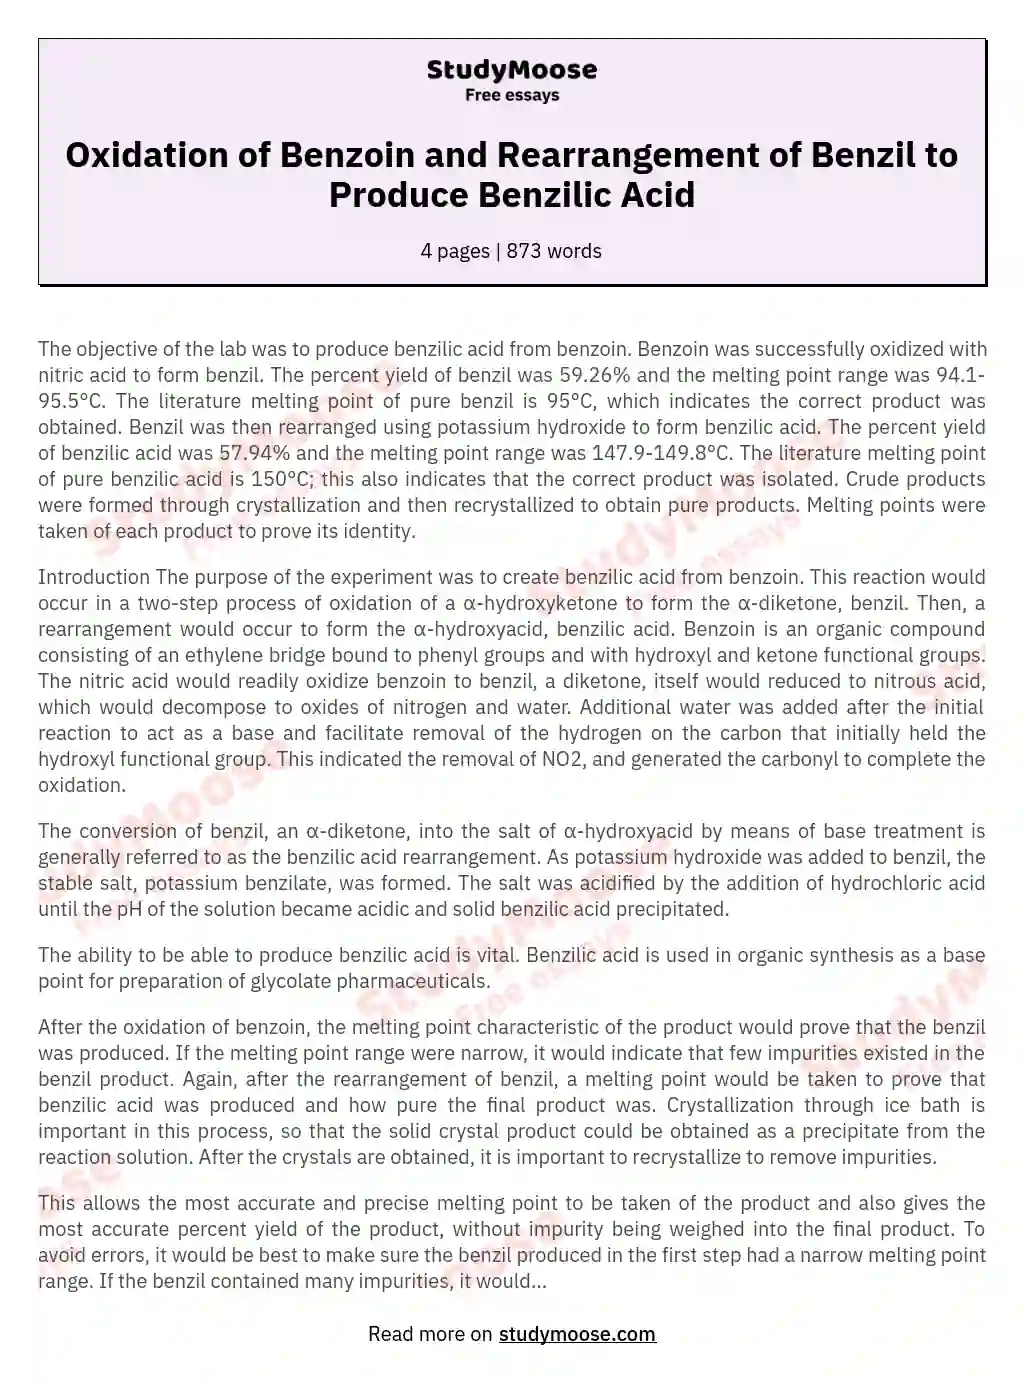 Oxidation of Benzoin and Rearrangement of Benzil to Produce Benzilic Acid essay